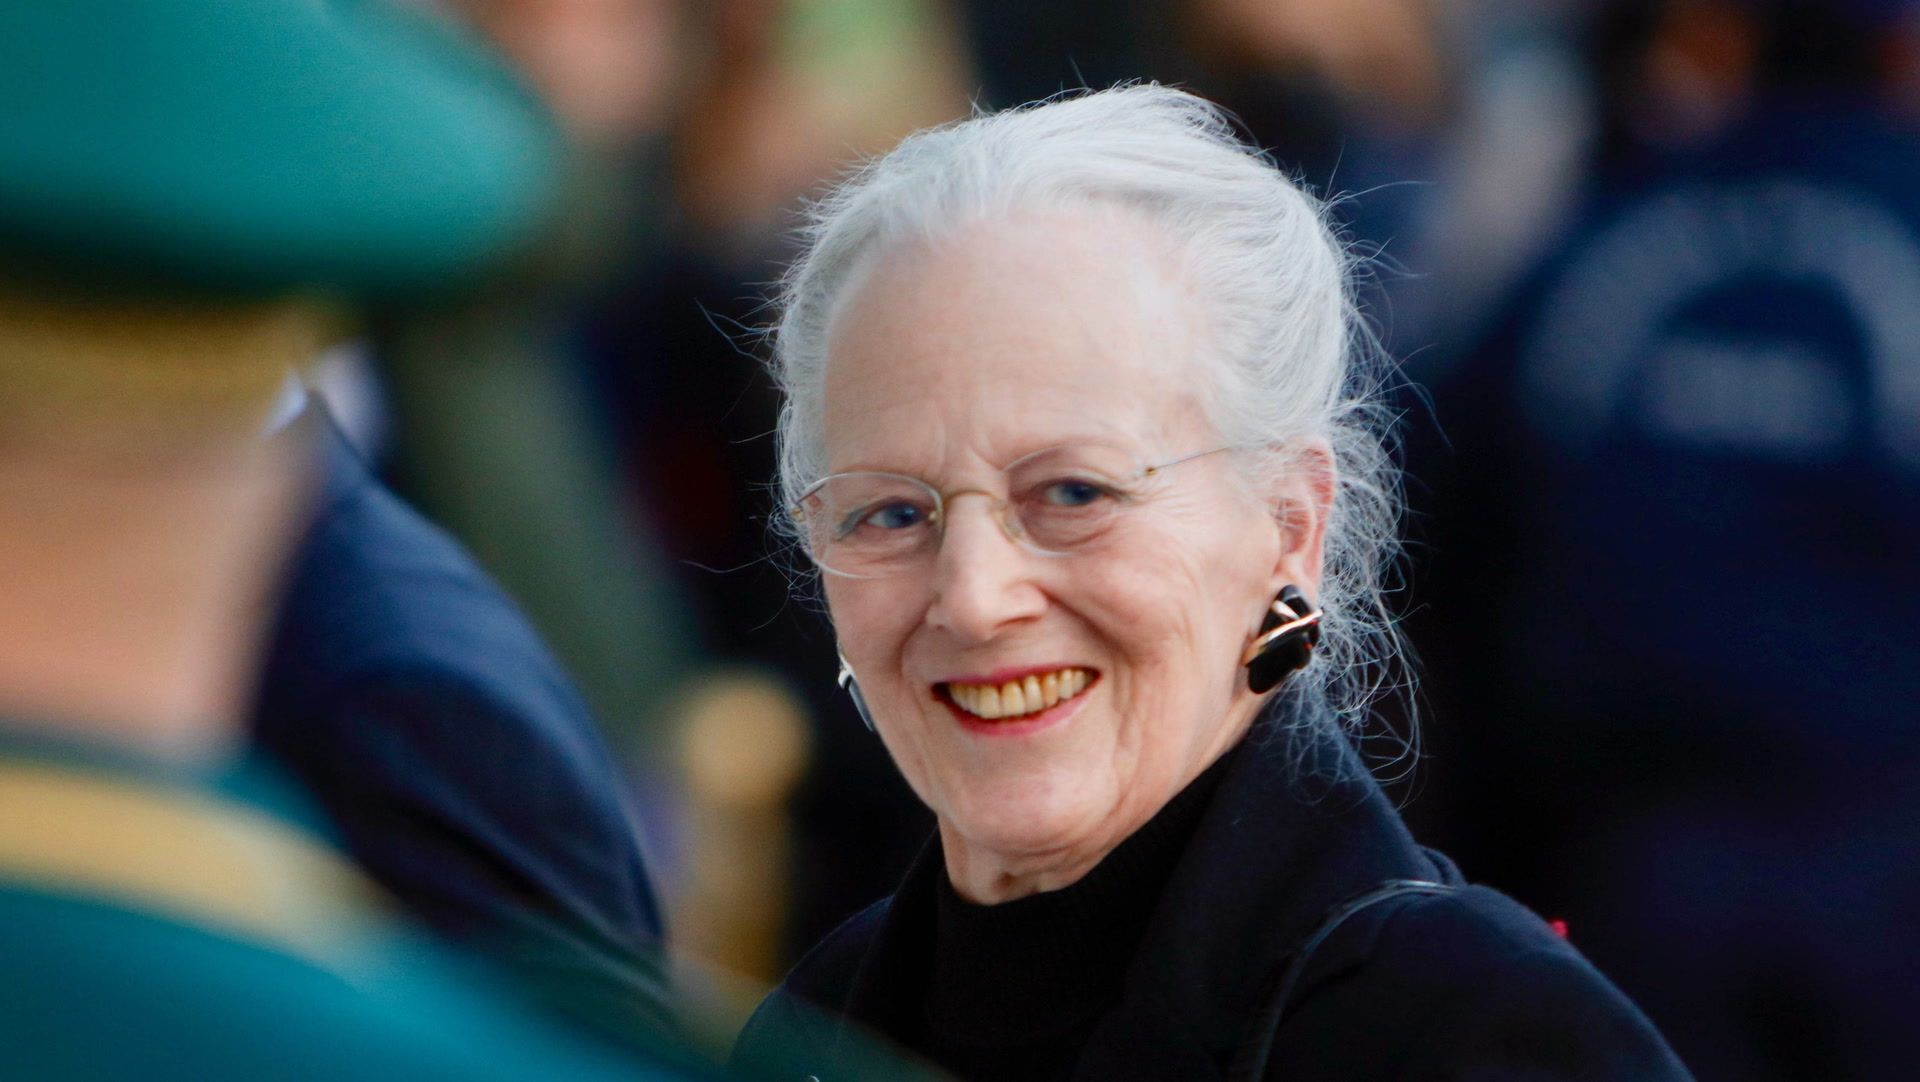 Worry about Queen Margrethe: She cancels summer appointments